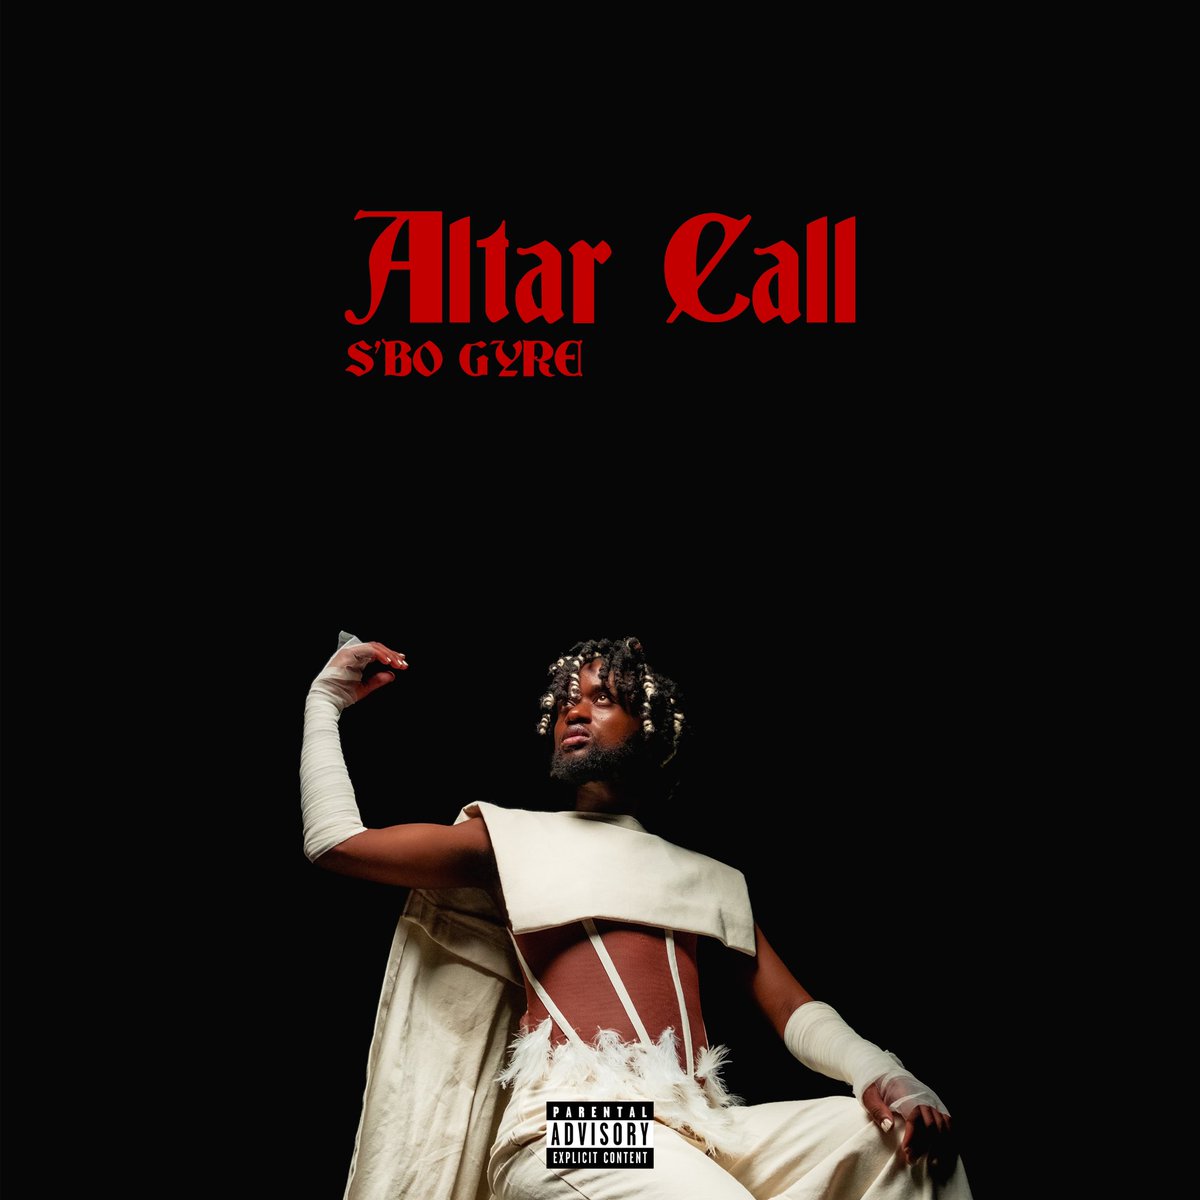 🔔 #AltarCall || 10 MAY 2024 🔔 My sophomore project #AltarCall - I could cry. This project, this era I call #TheCalling, will truly illustrate my musicianship. Please pre-save and spread the word. 🙏🏽 linktr.ee/Gyre